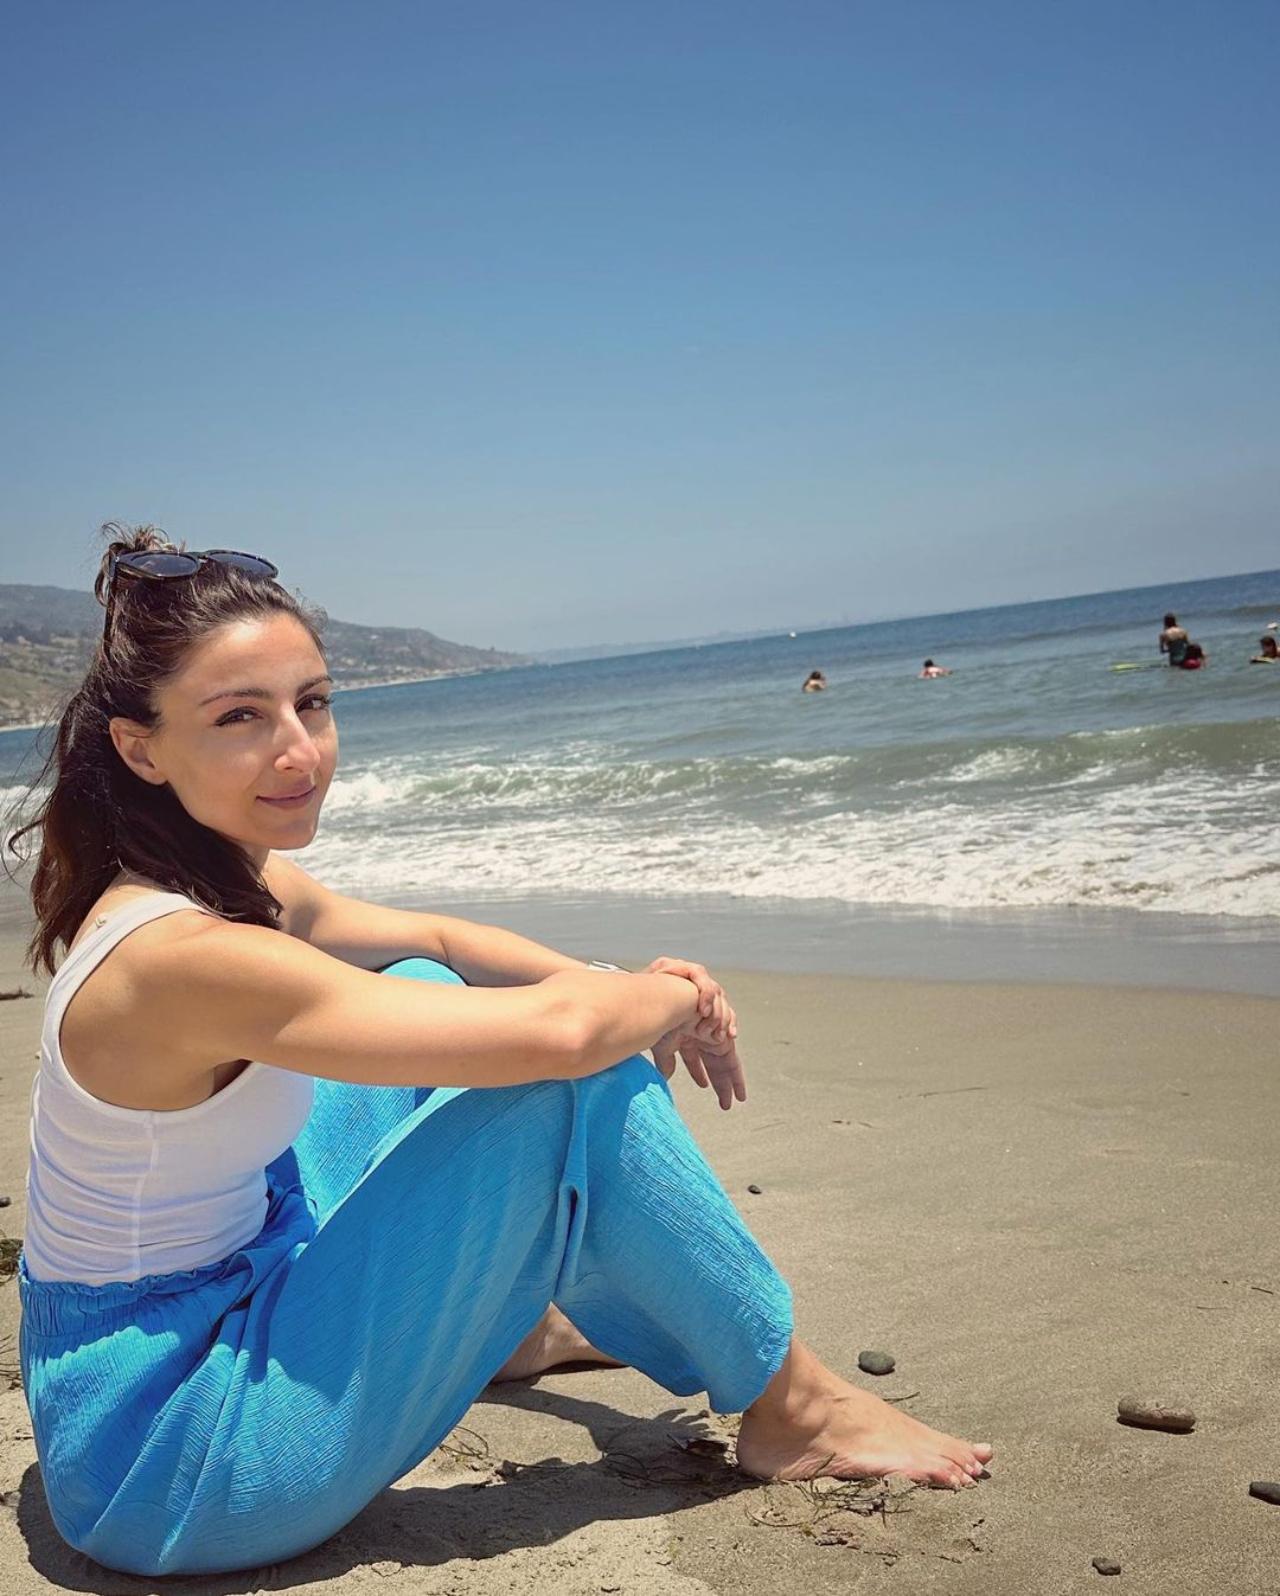 Soha is chilling by the beach - windswept hair, sand and waves - vacay mode is on!